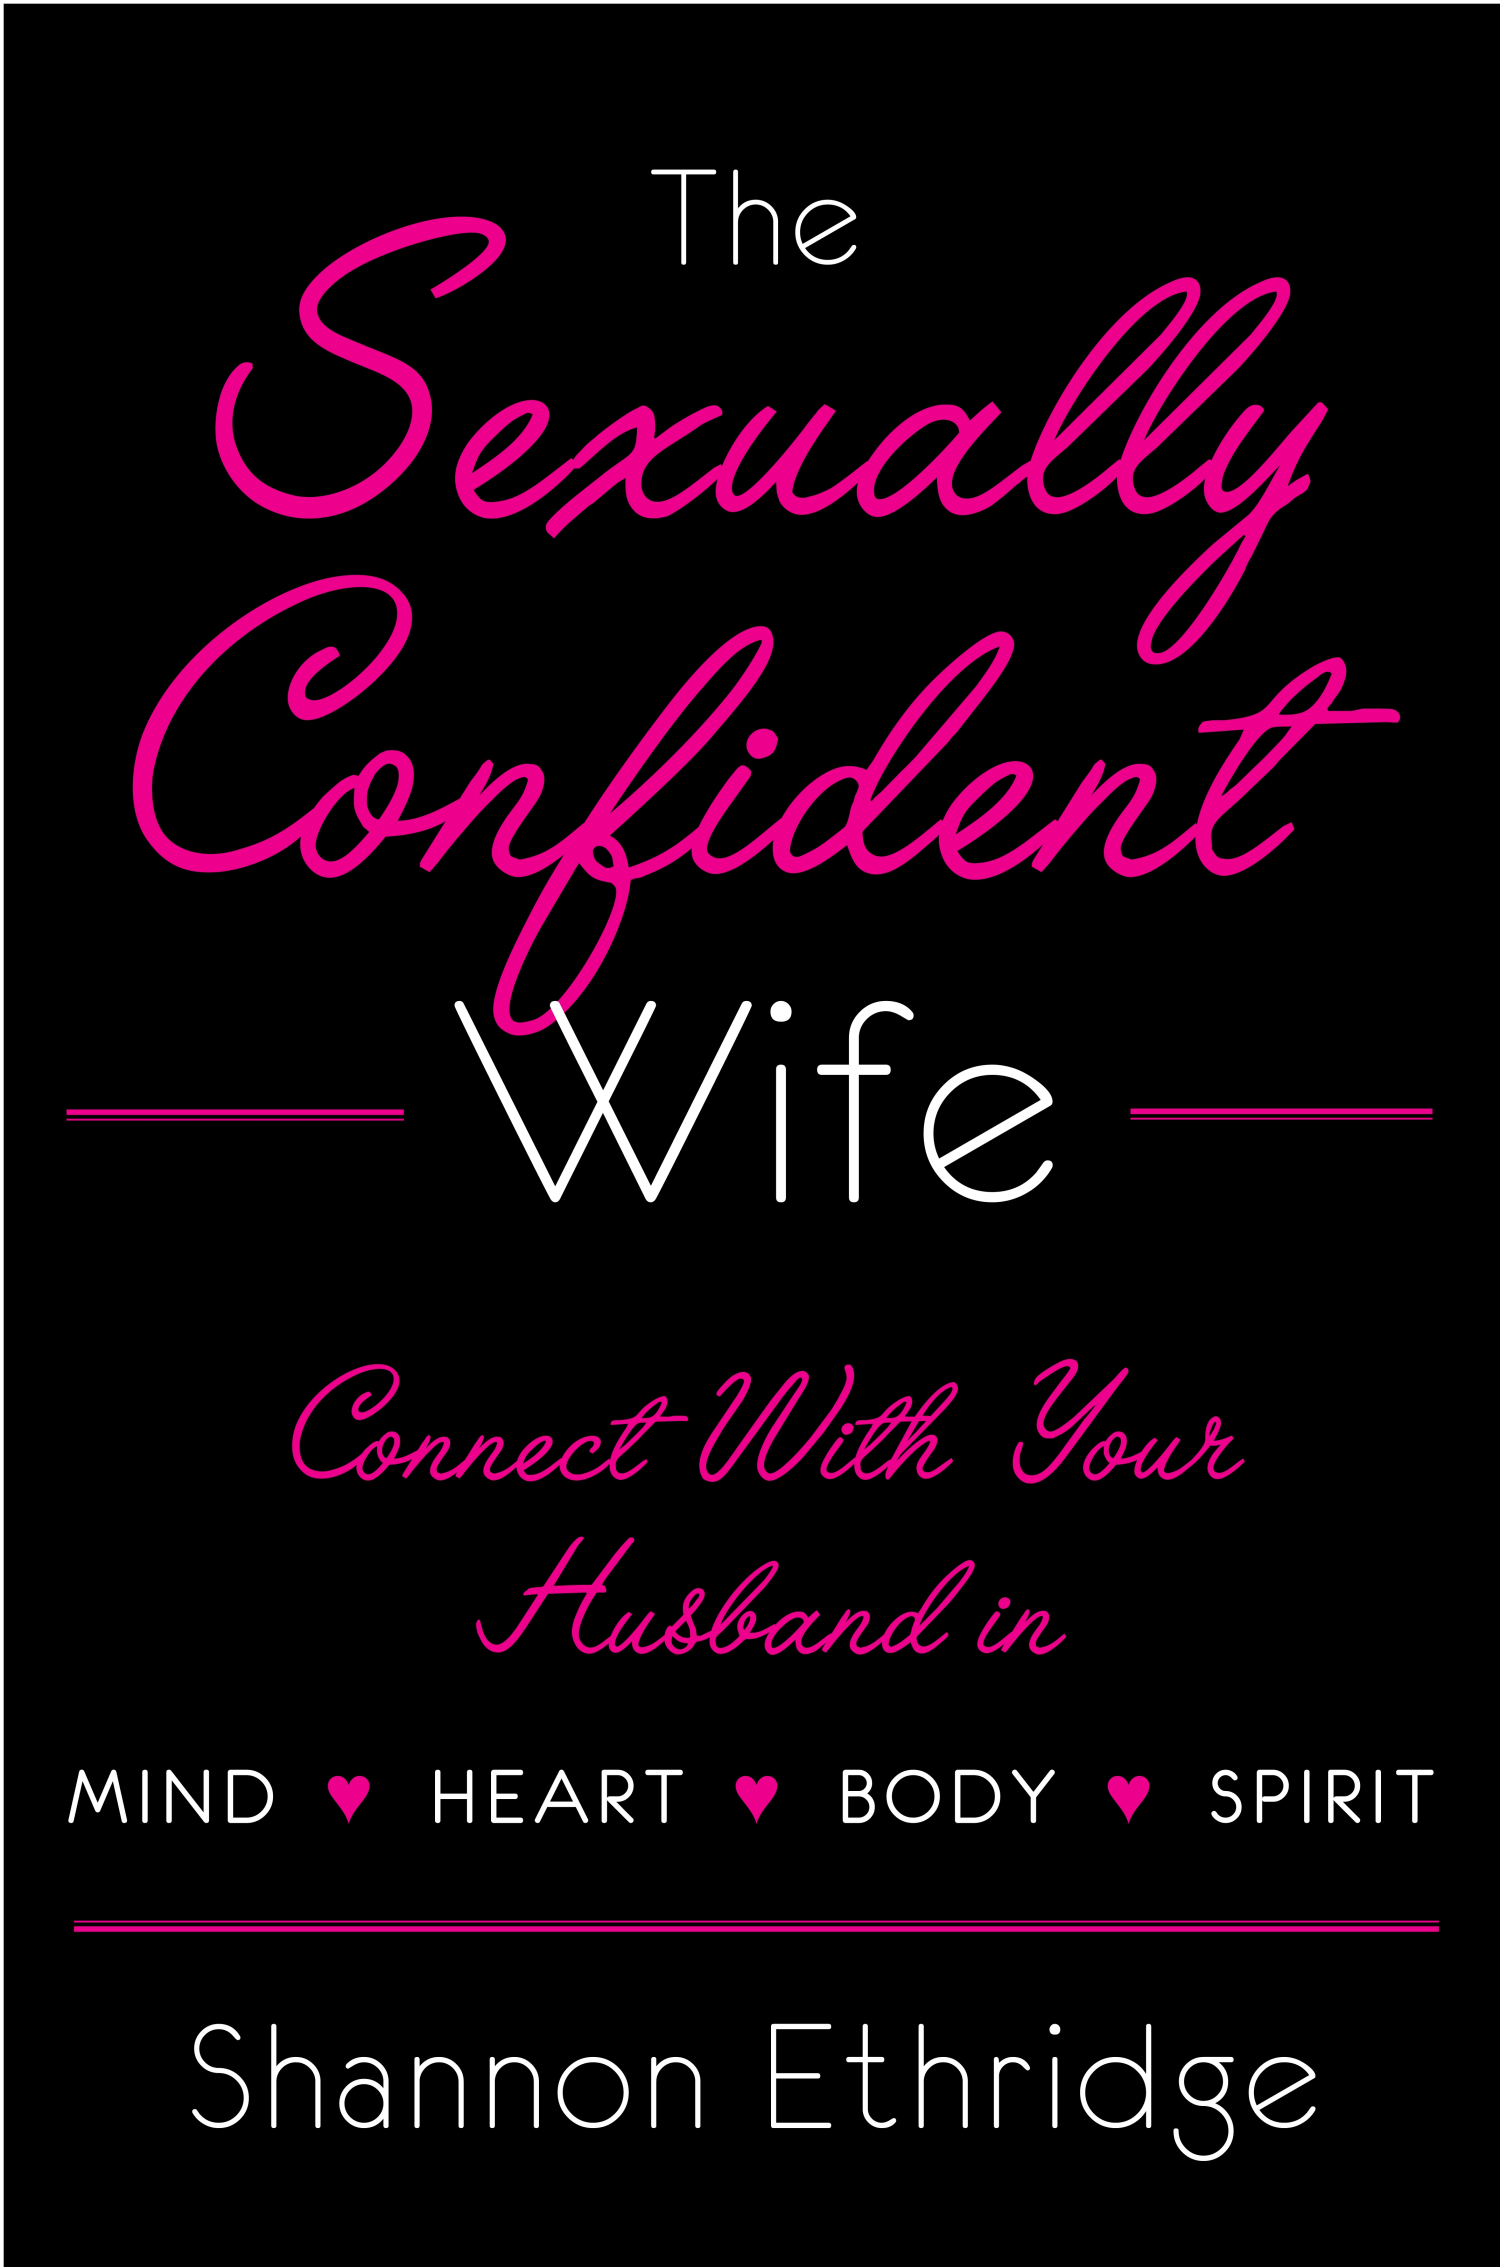 How to restore your sexual confidence photo